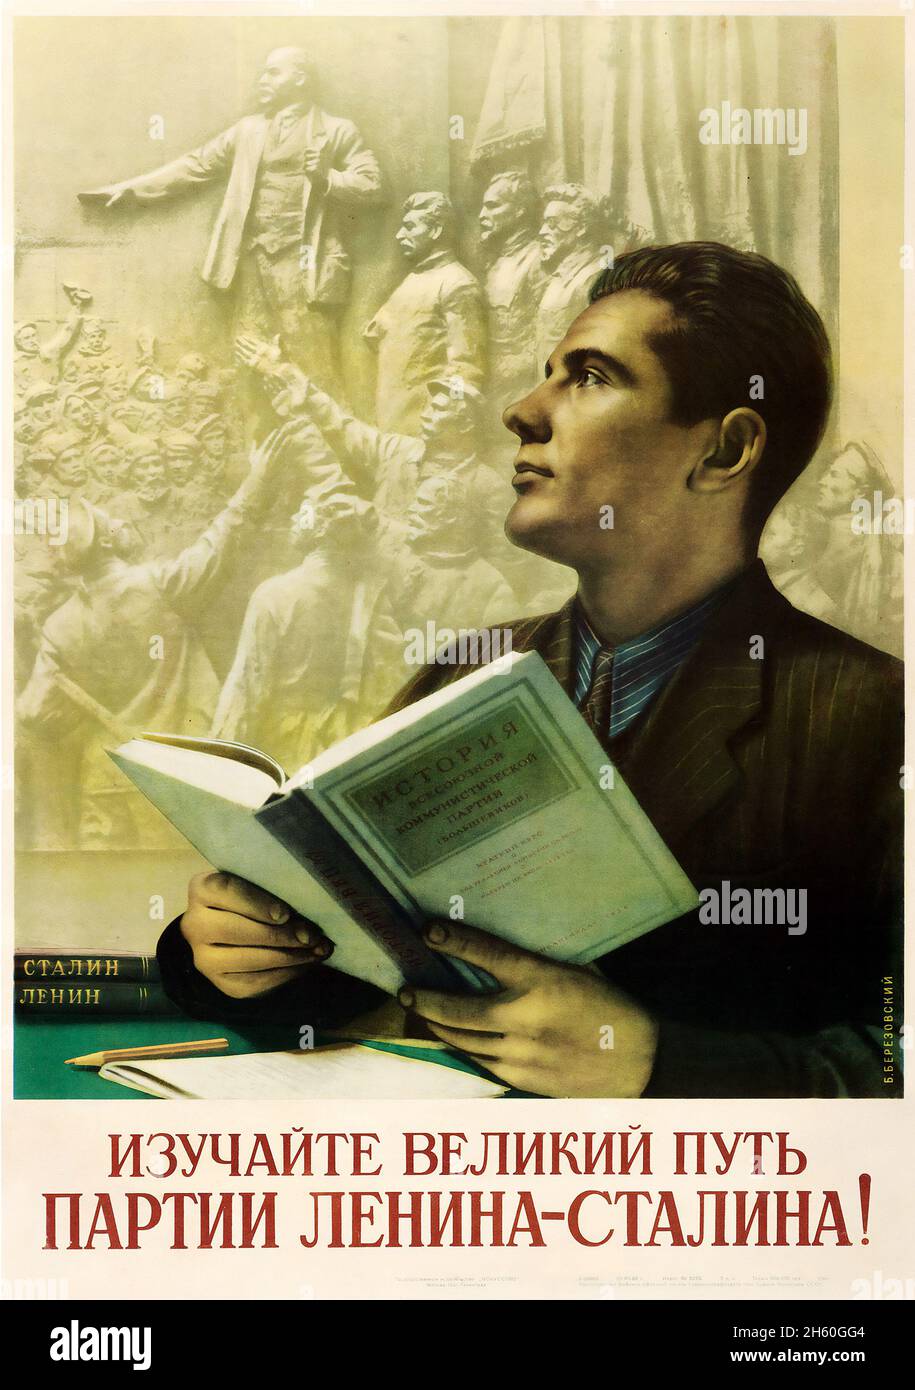 We Study the Great Path of Lenin and Stalin (Moscow, 1952). Vintage Russian Propaganda Poster. Stock Photo